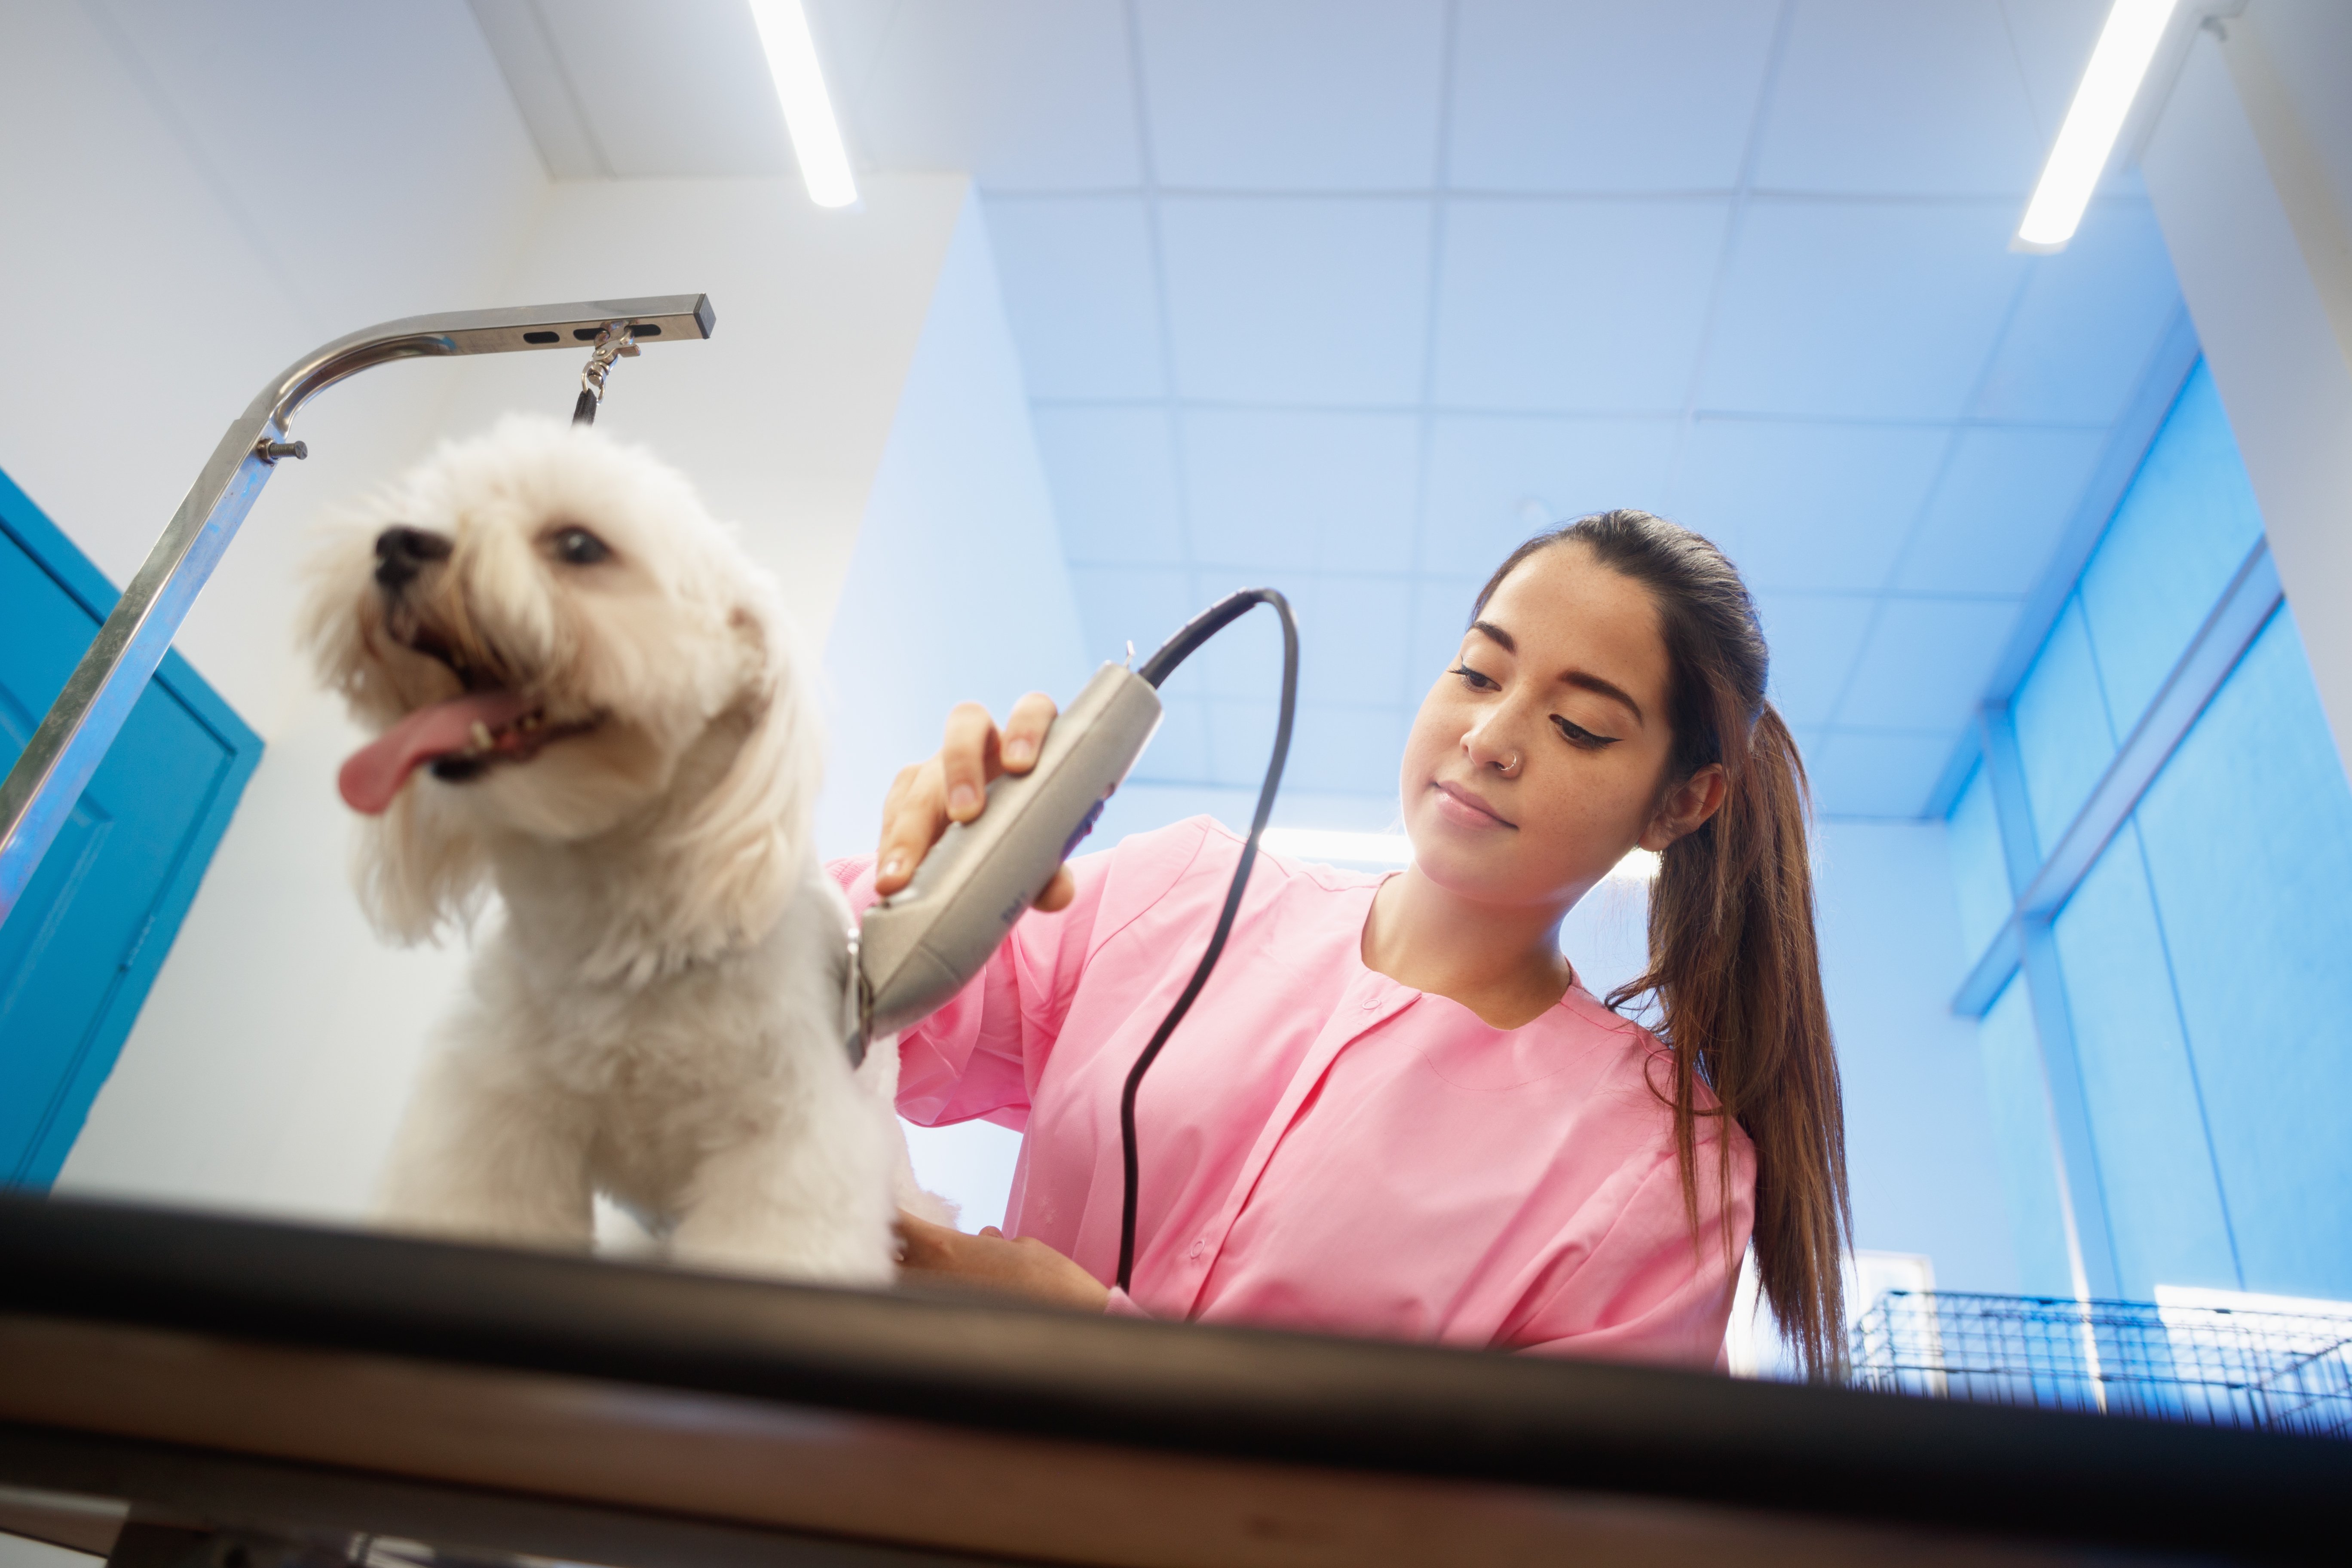 This woman is grooming a dog which represents the types of services that Gingr’s pet grooming software will help streamline.